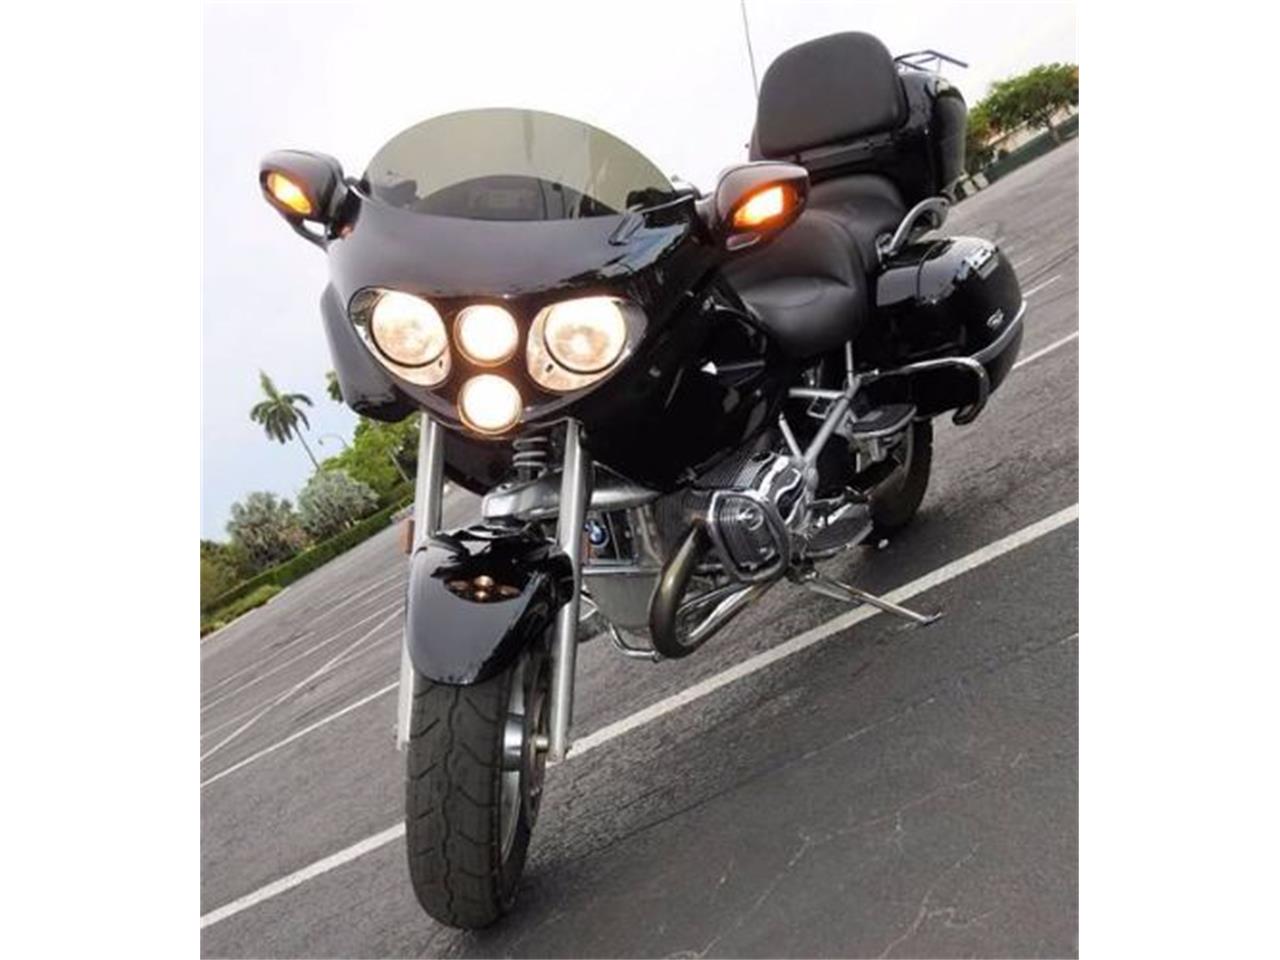 2004 BMW Motorcycle for Sale | ClassicCars.com | CC-1355650